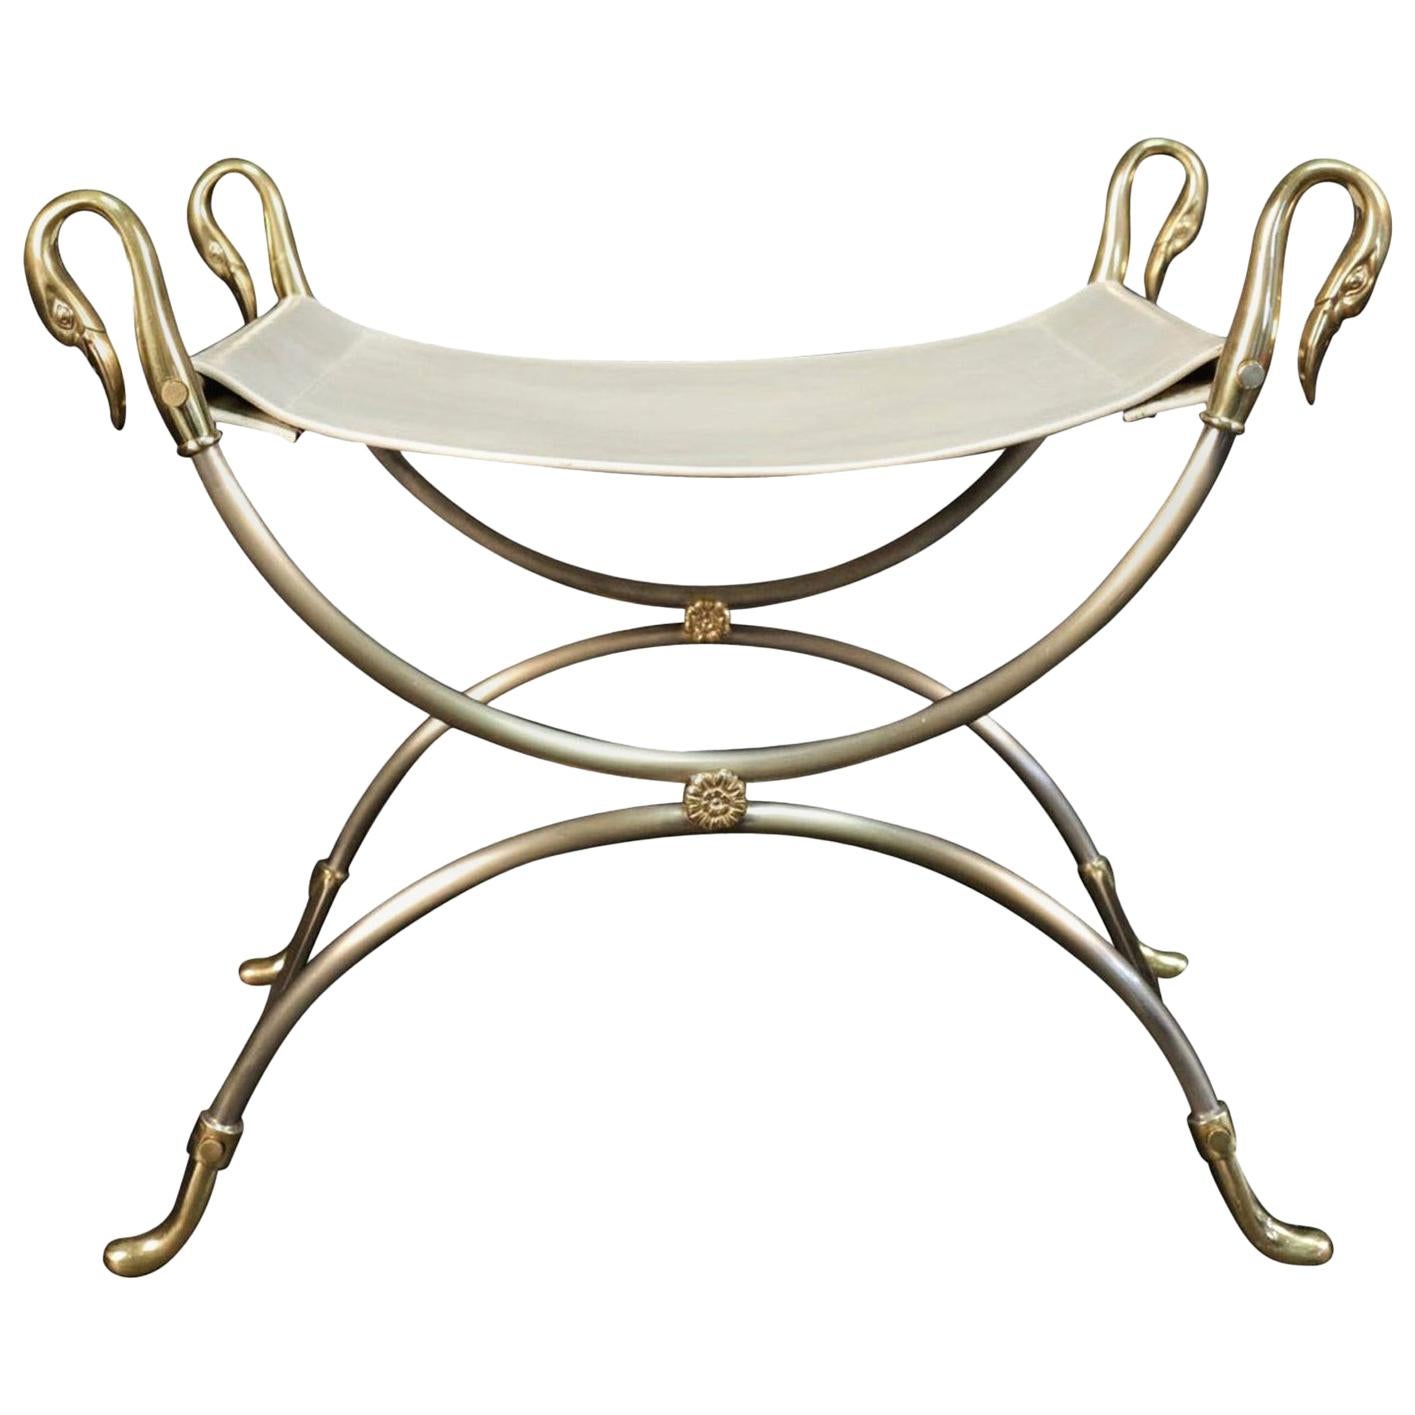 1970 Curule Stool in Gilded and Silvered Bronze "Swans" Model from Maison Charle For Sale